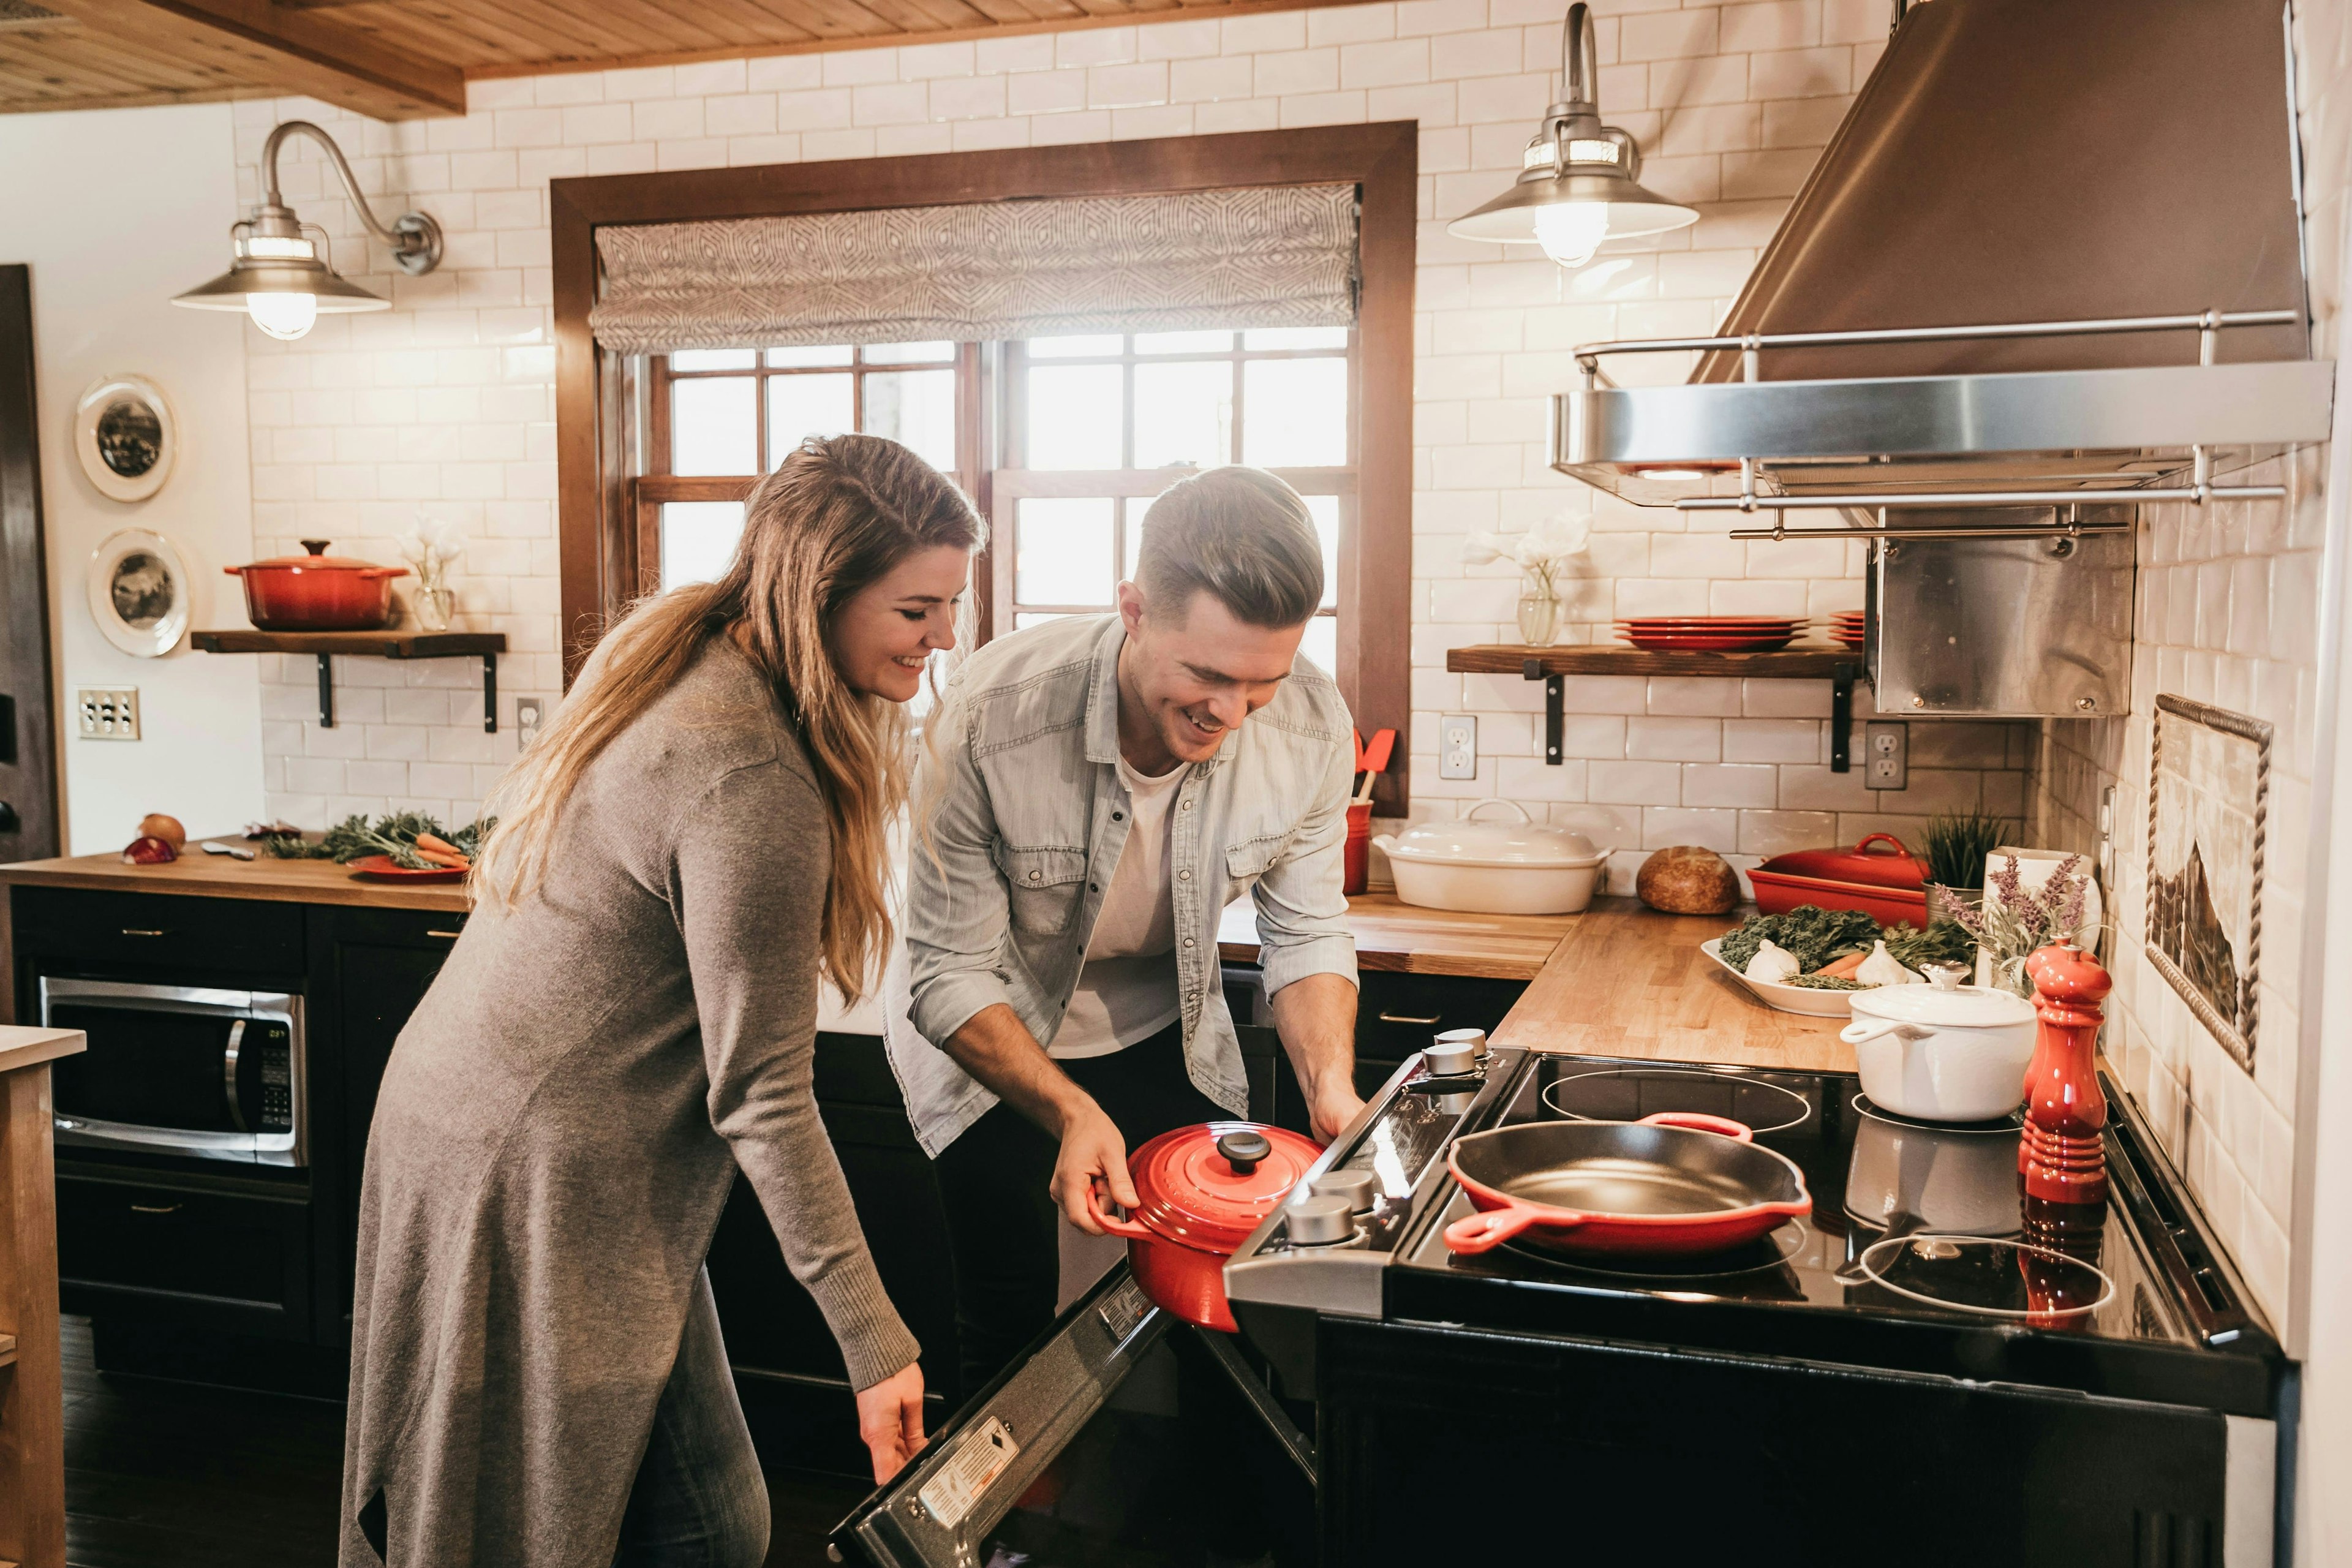 Image of a couple cooking in a kitchen